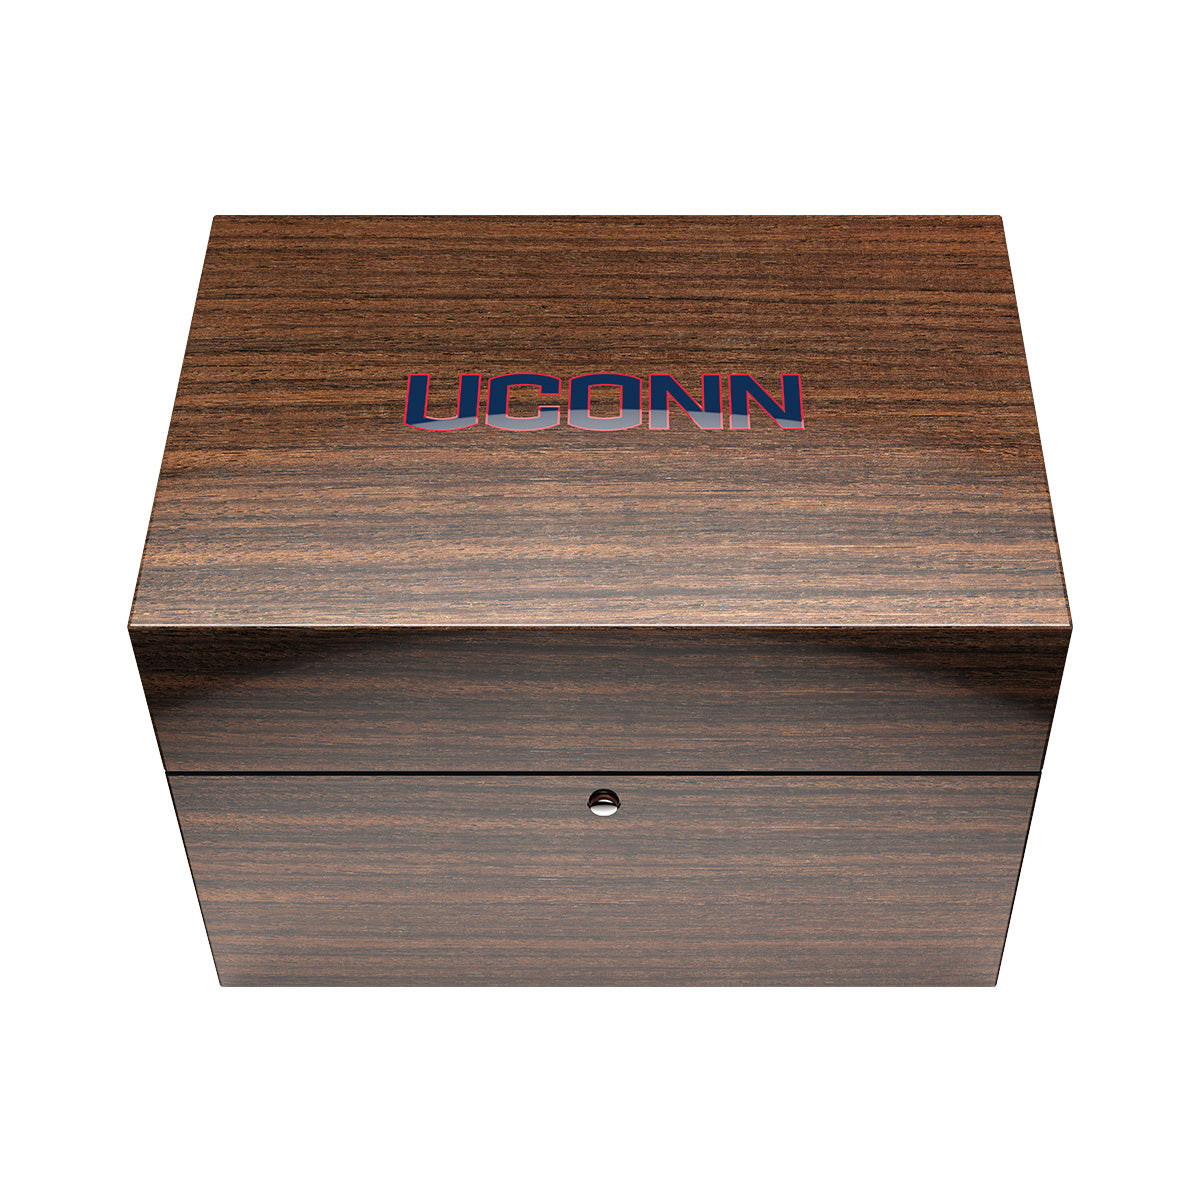 UCONN University of Connecticut wood display box. Closed view.